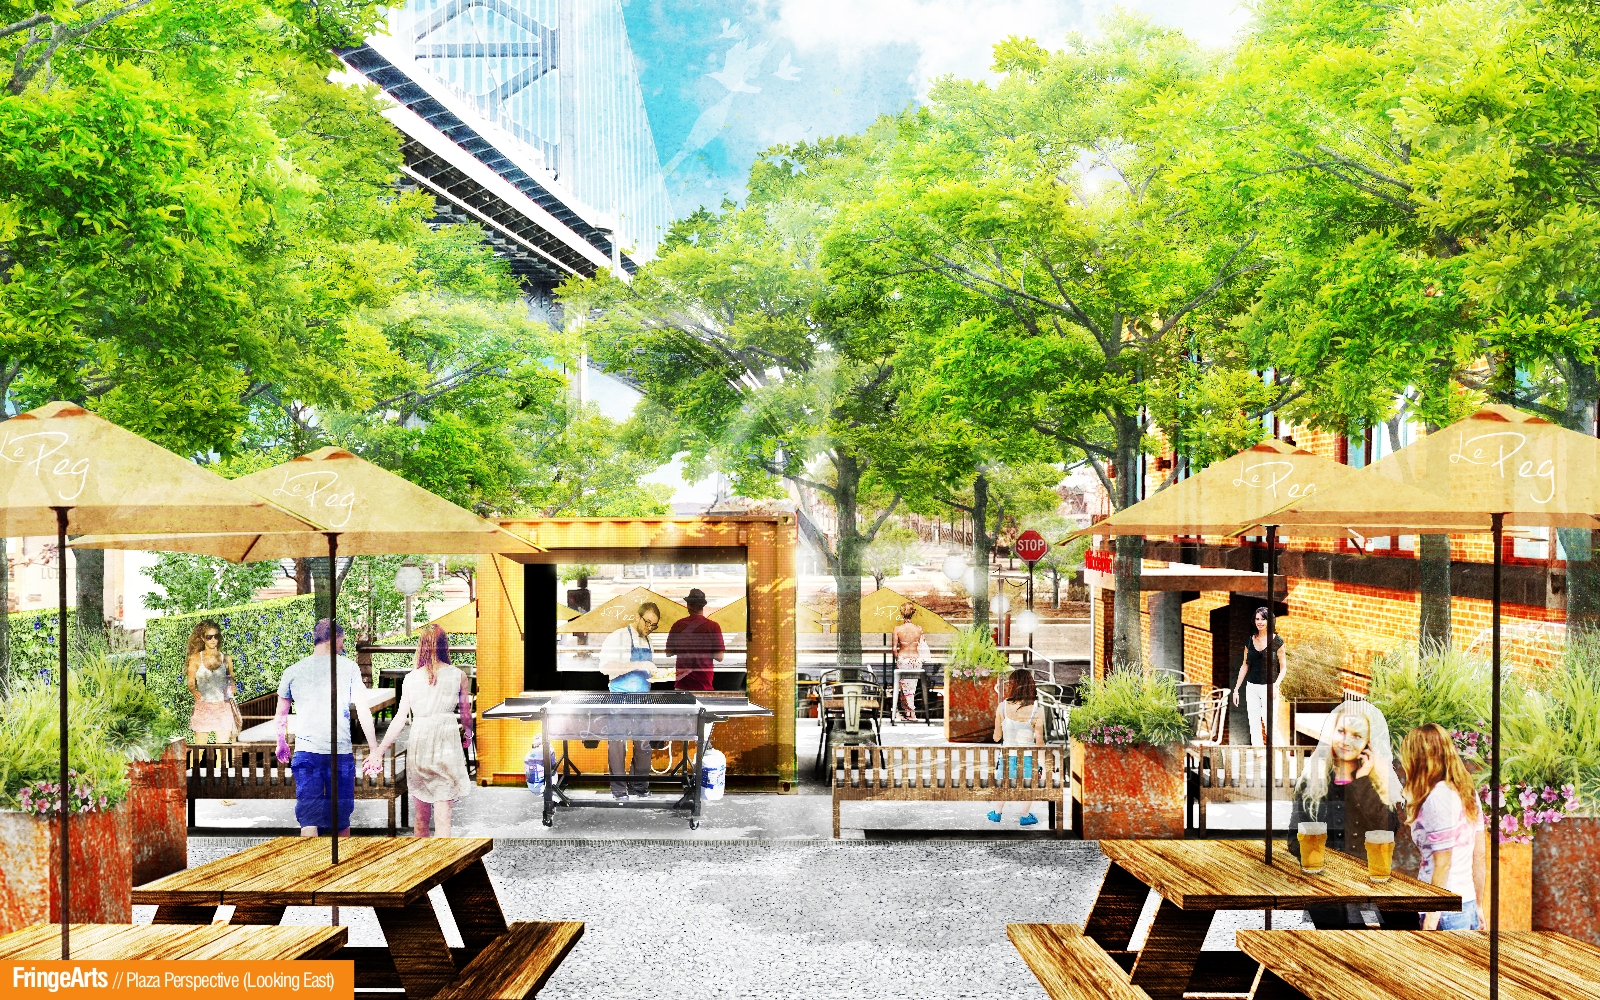 Rendering looking east from FringeArts plaza | Groundswell Design Group